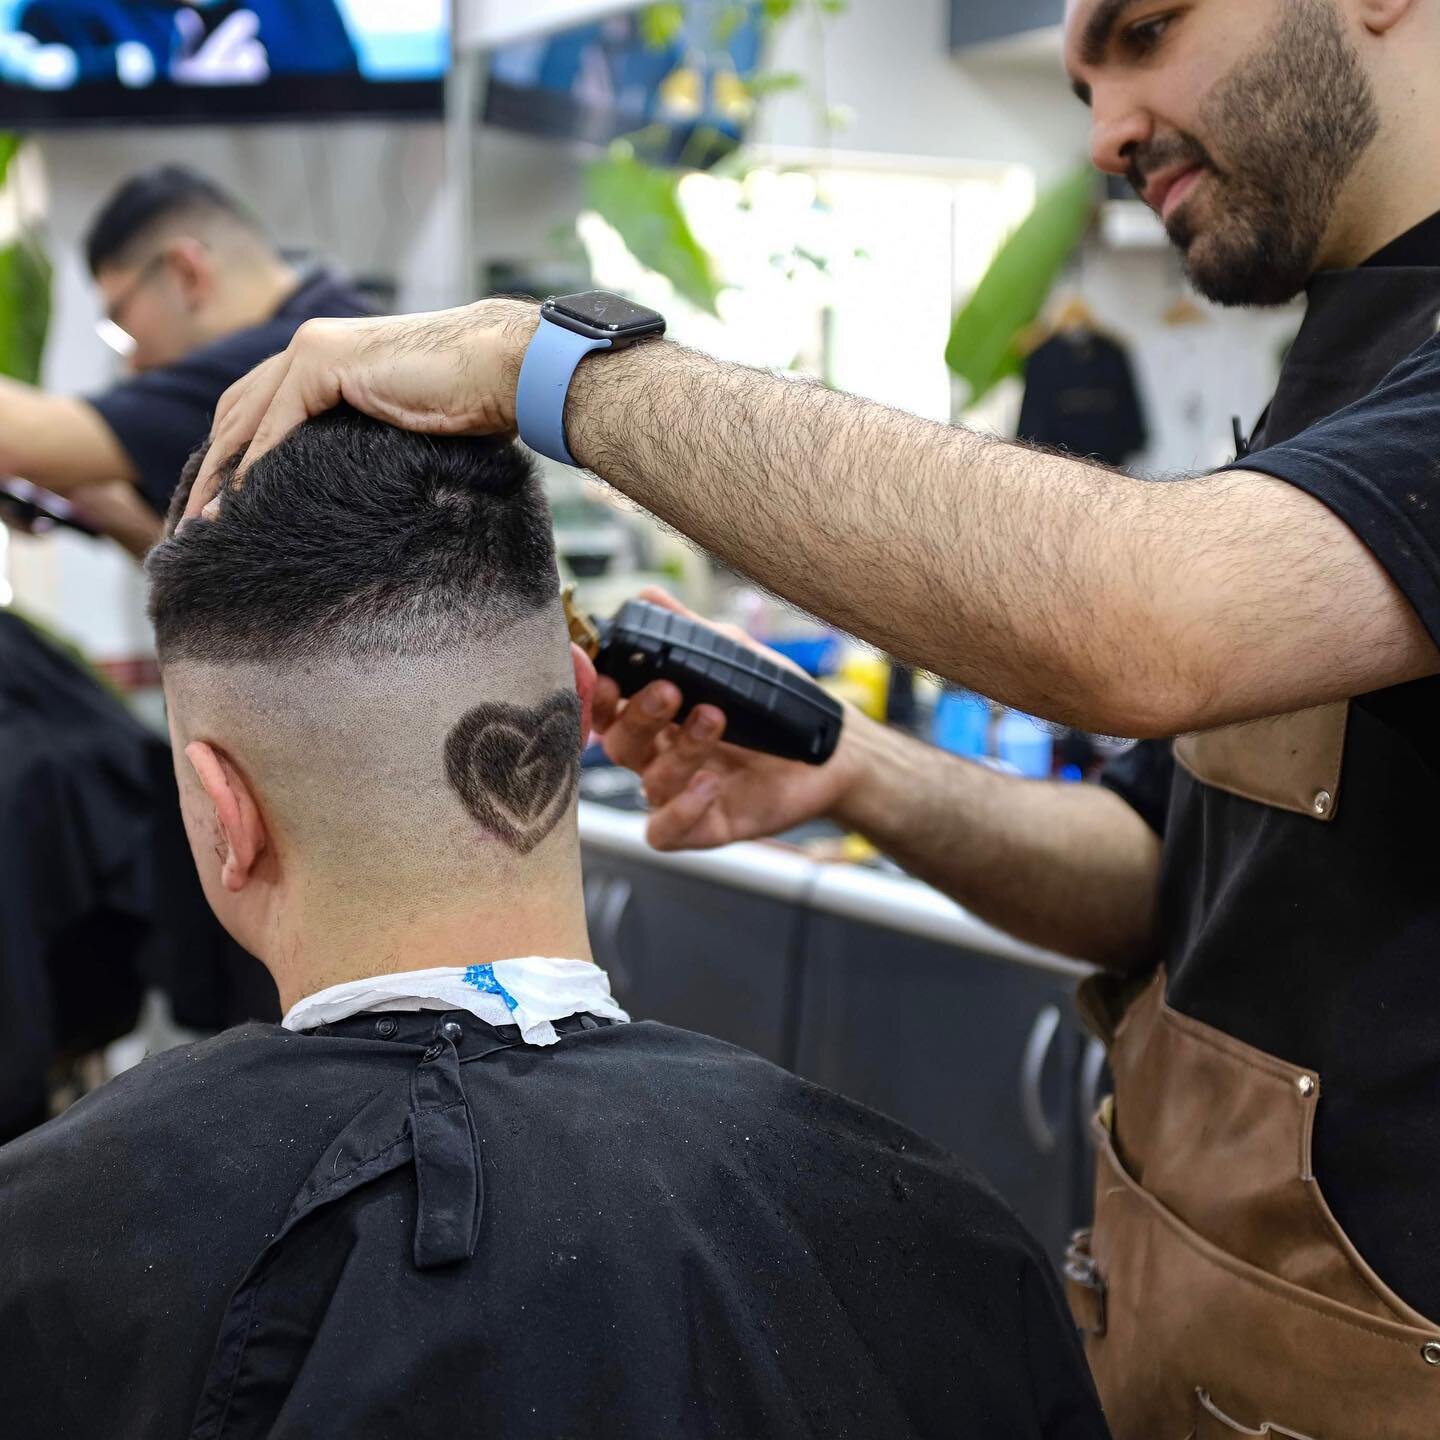 We aren&rsquo;t just a barber we are artists 🔥

Remember to book early and that all of our barbers are at the highest quality. 

Head to our bio to book in a cut!

&bull;

&bull;

&bull;

&bull;

#barber #barbershop #freshfade #fade #staysharp #clea